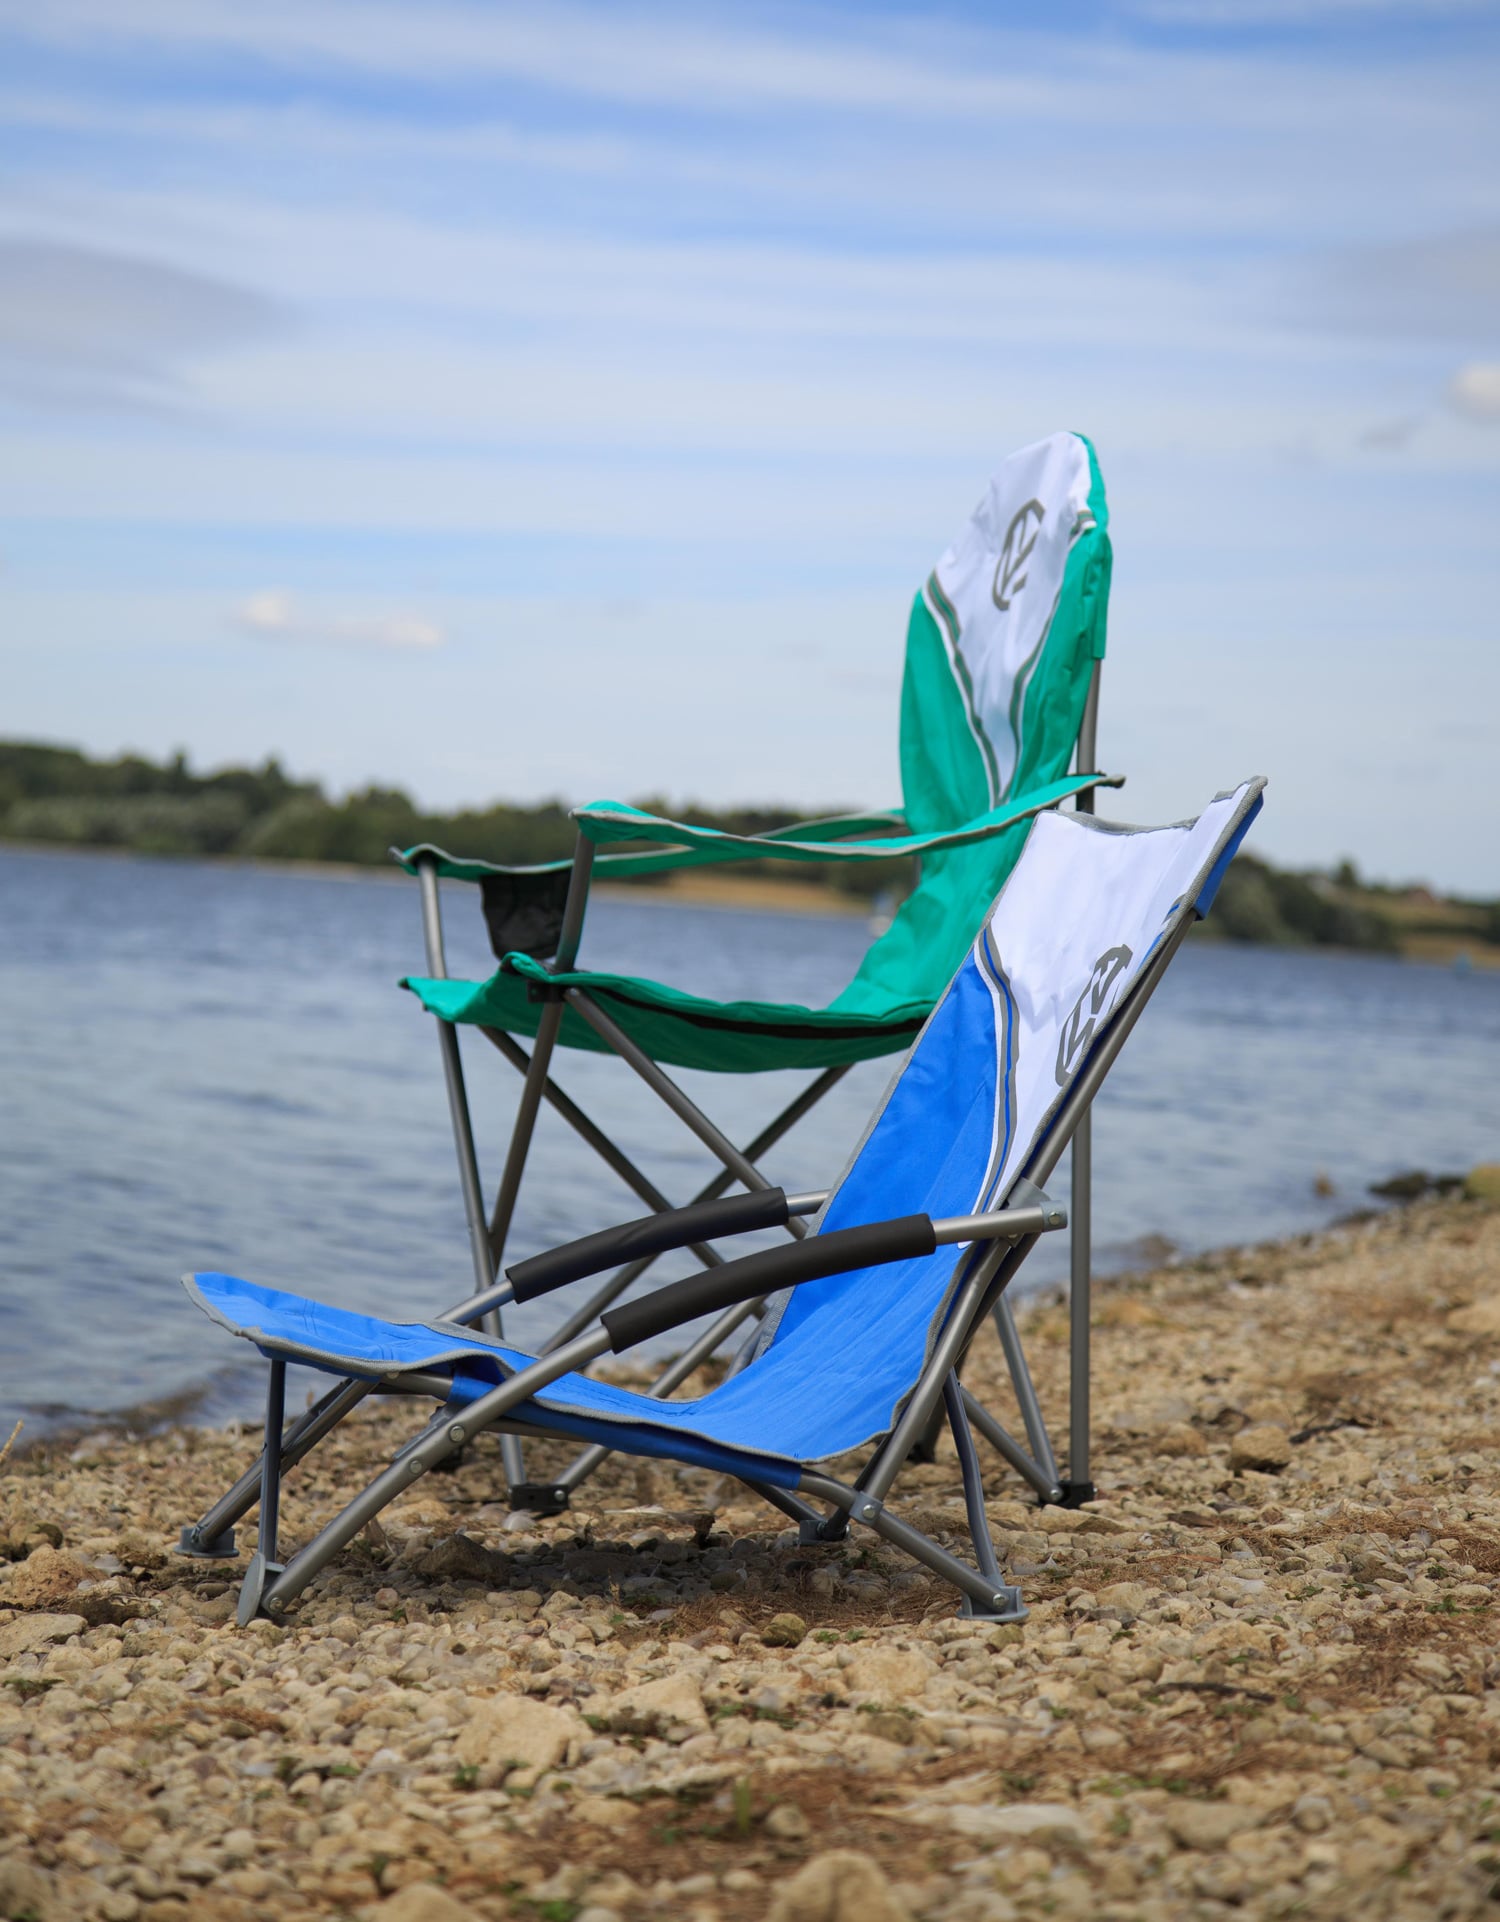 VW Camp Chair Review